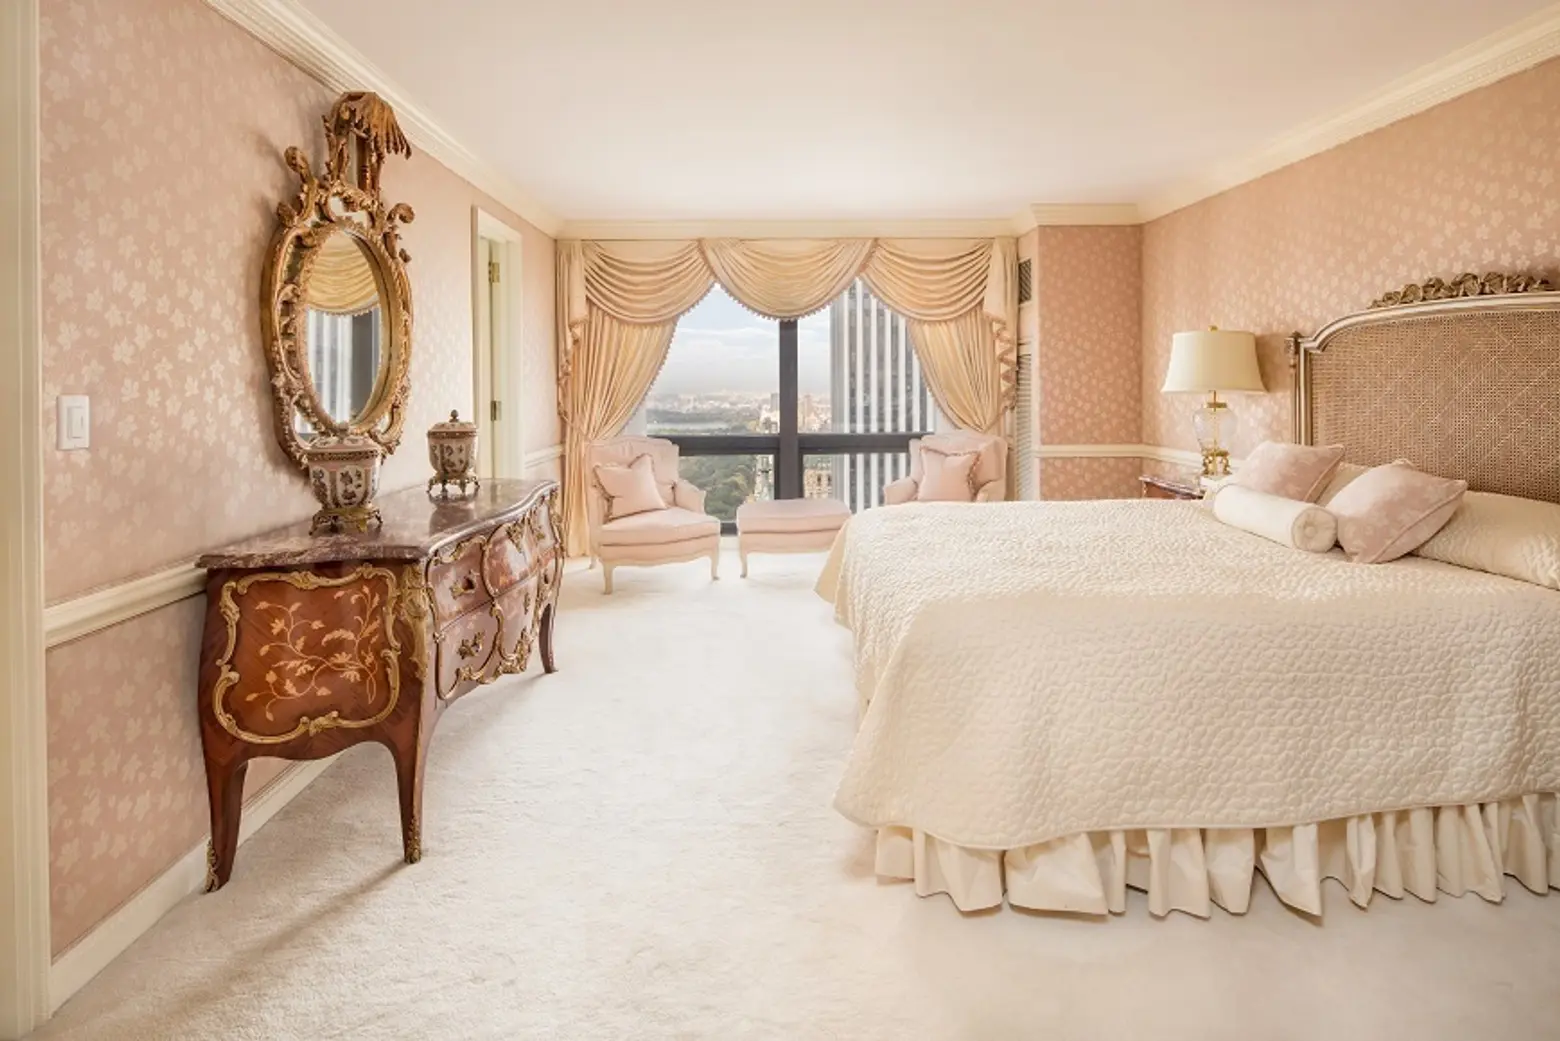 Trump Tower, 721 Fifth Avenue, Donald Trump, Michael Jackson, Jacko, Lisa Marie Presley, Dolly Lenz, Fred Trump, Penthouse, Cool Listings, Manhattan penthouse for sale, big tickets